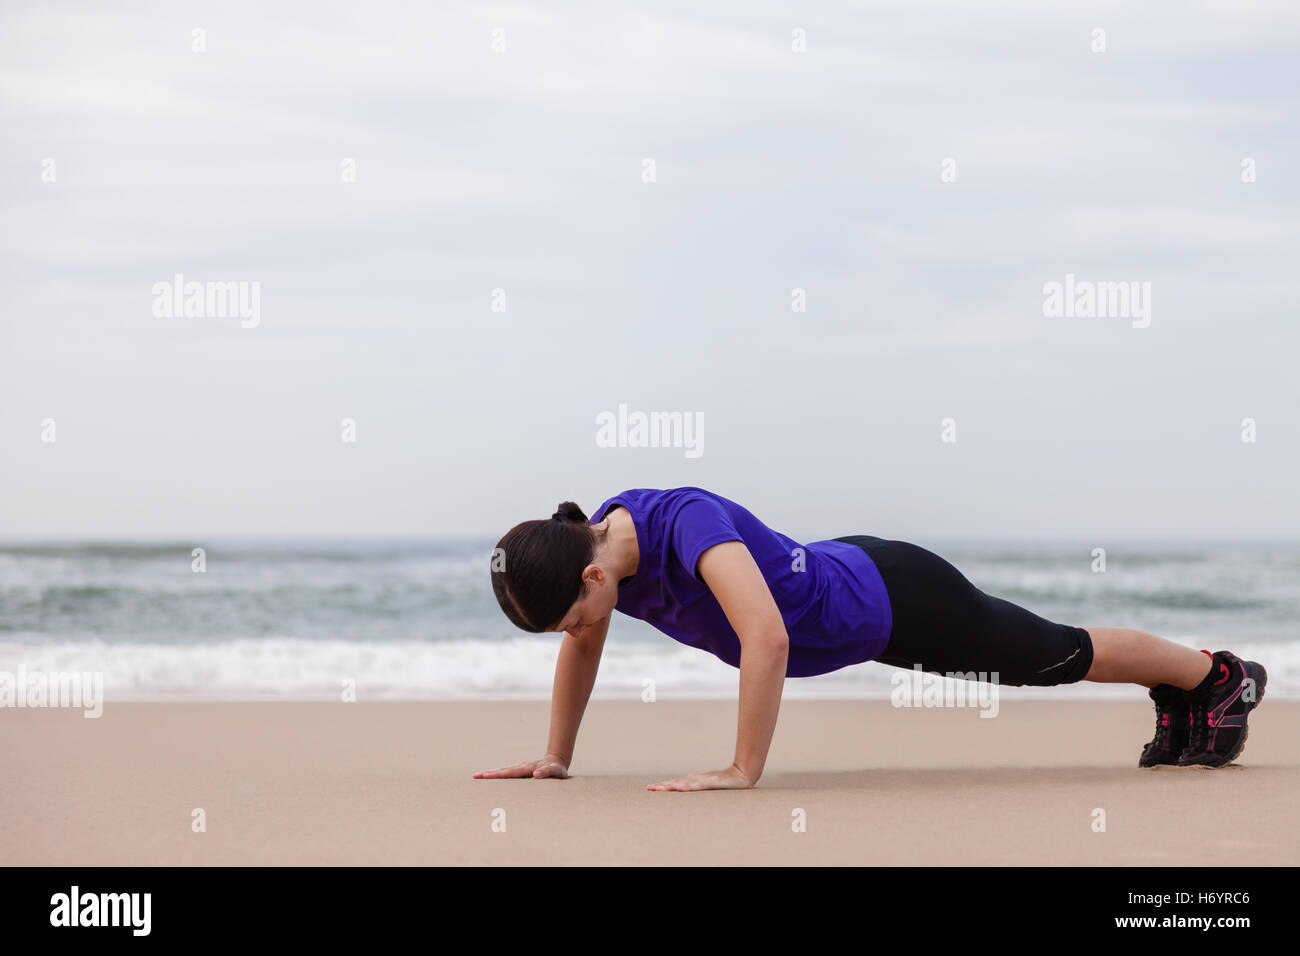 Female athlete executing push-ups at the beach on an Autumn day. Stock Photo